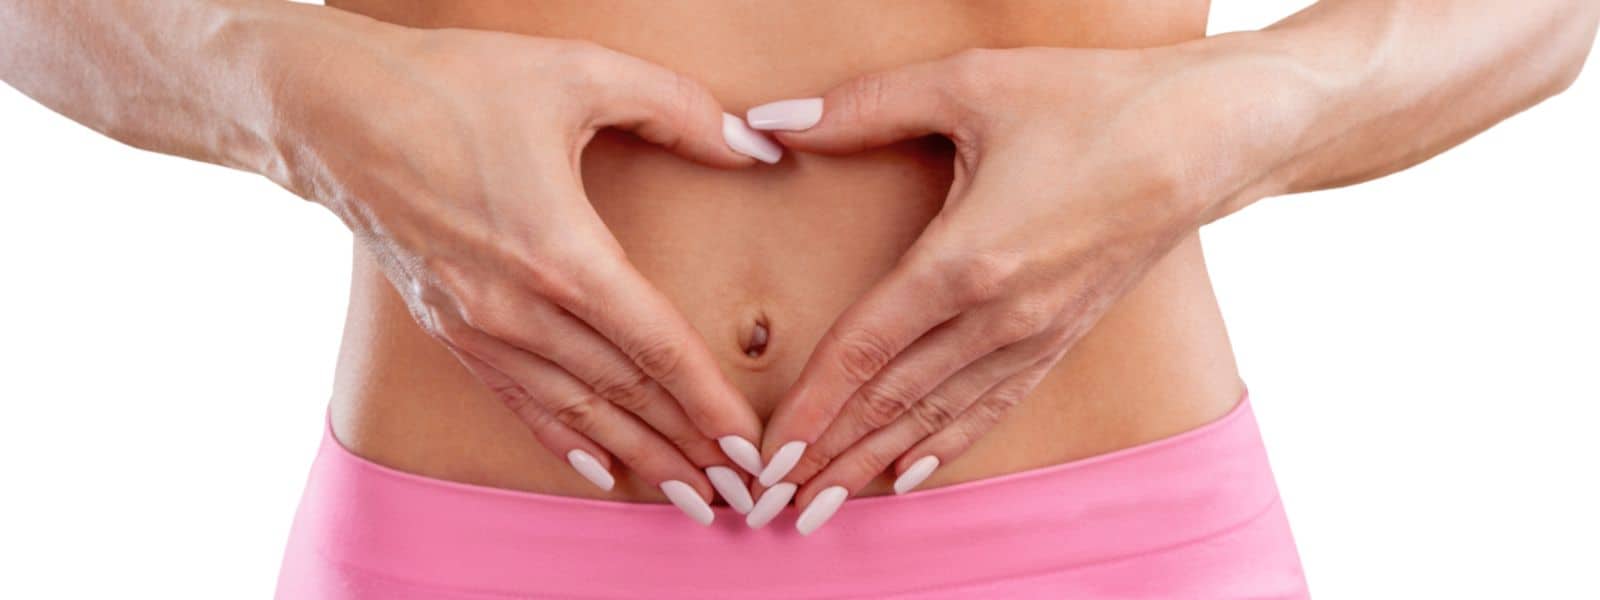 An image of a female abdomen with hands over it in the shape of a heart to represent a happy digestive system after colonic irrigation